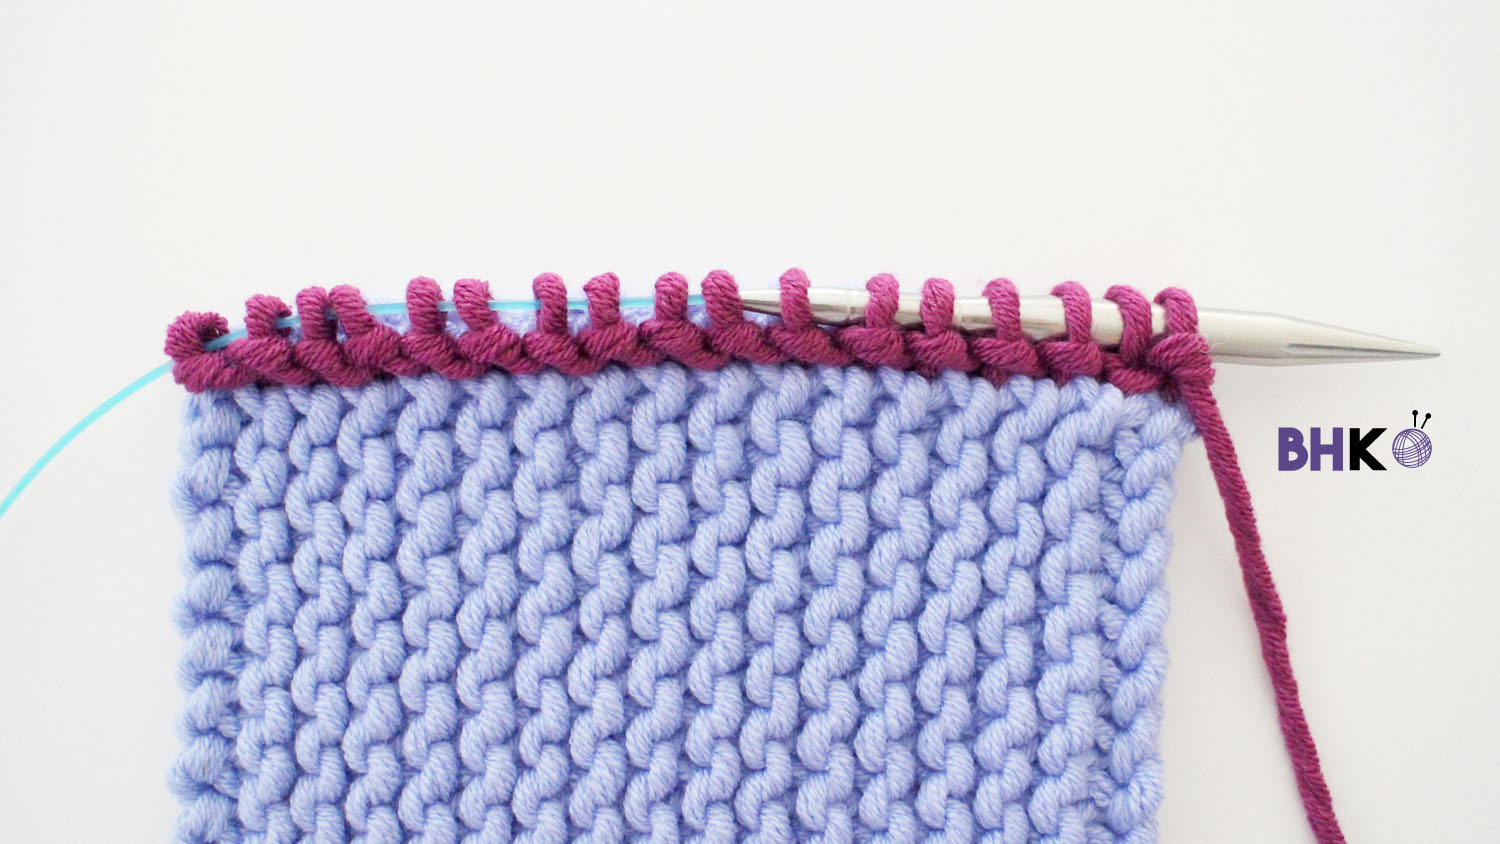 How to Pick Up and Knit on Garter Stitch